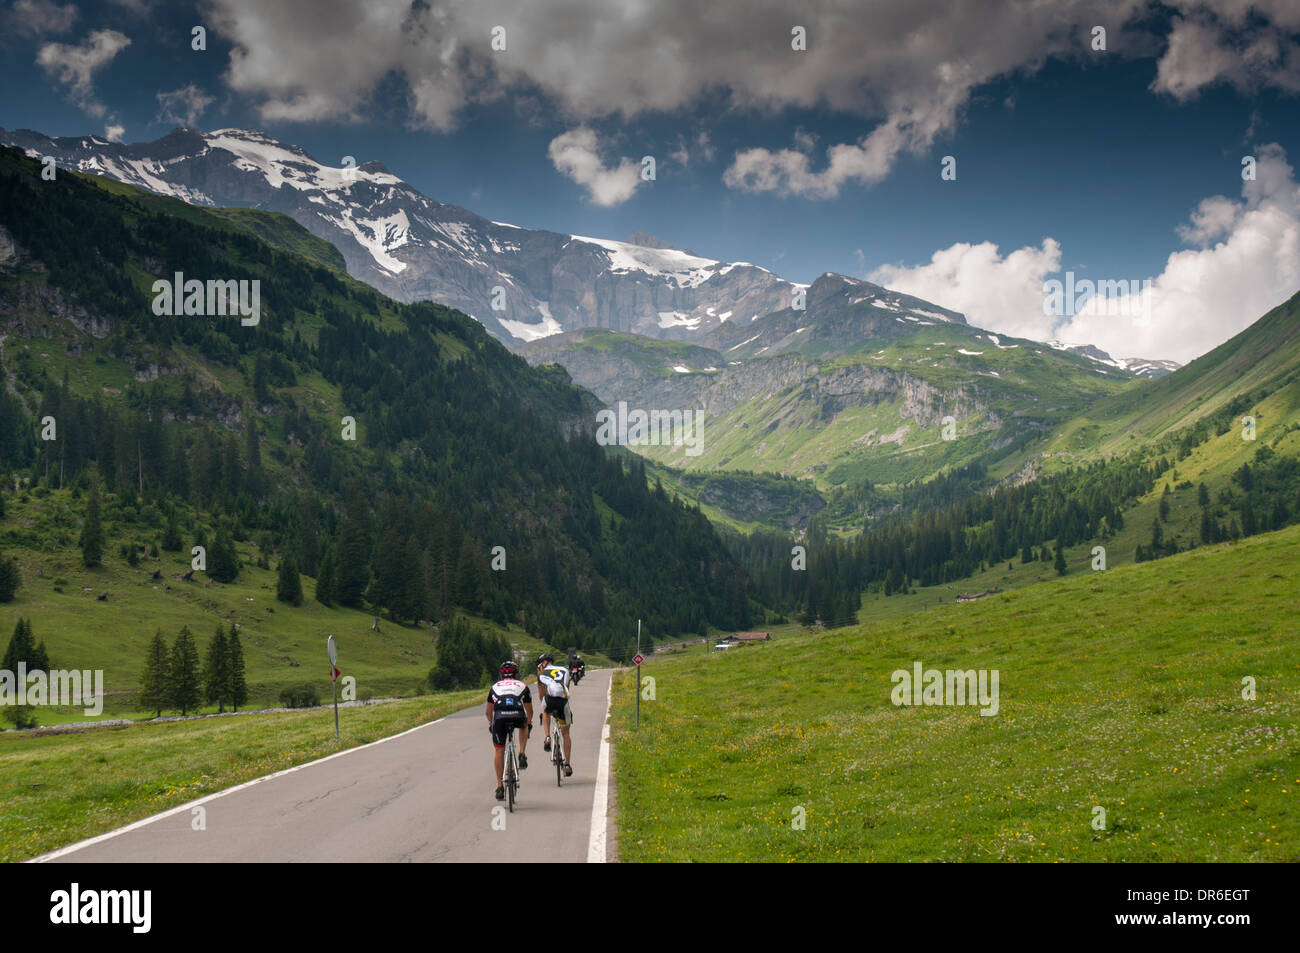 Two cyclists riding through the Unterboden valley towards the Klausenpass (1948m) in the Swiss Alps Stock Photo